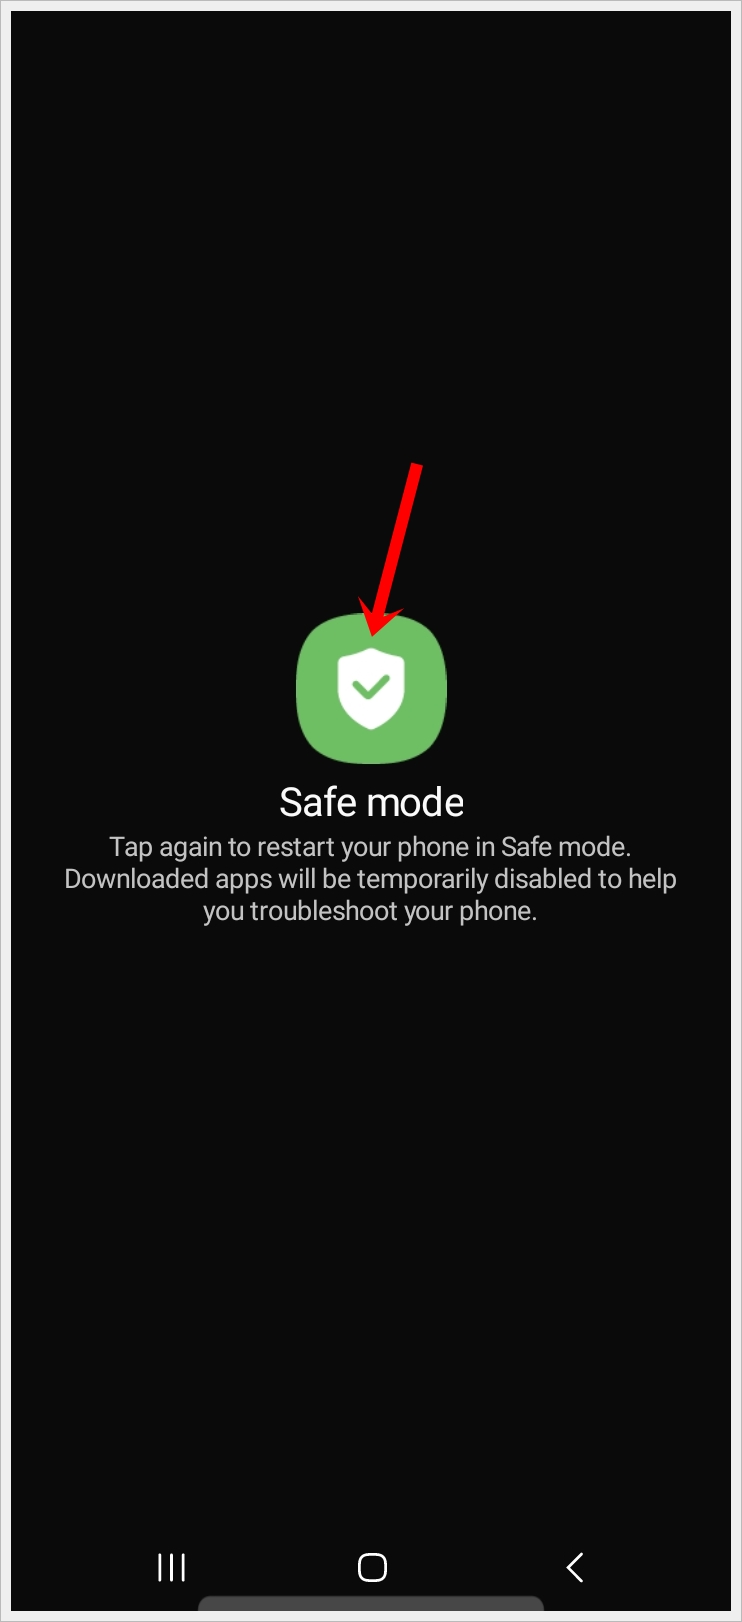 This image shows a screenshot from a Samsung phone. It features the 'Safe Mode' button being highlighted.